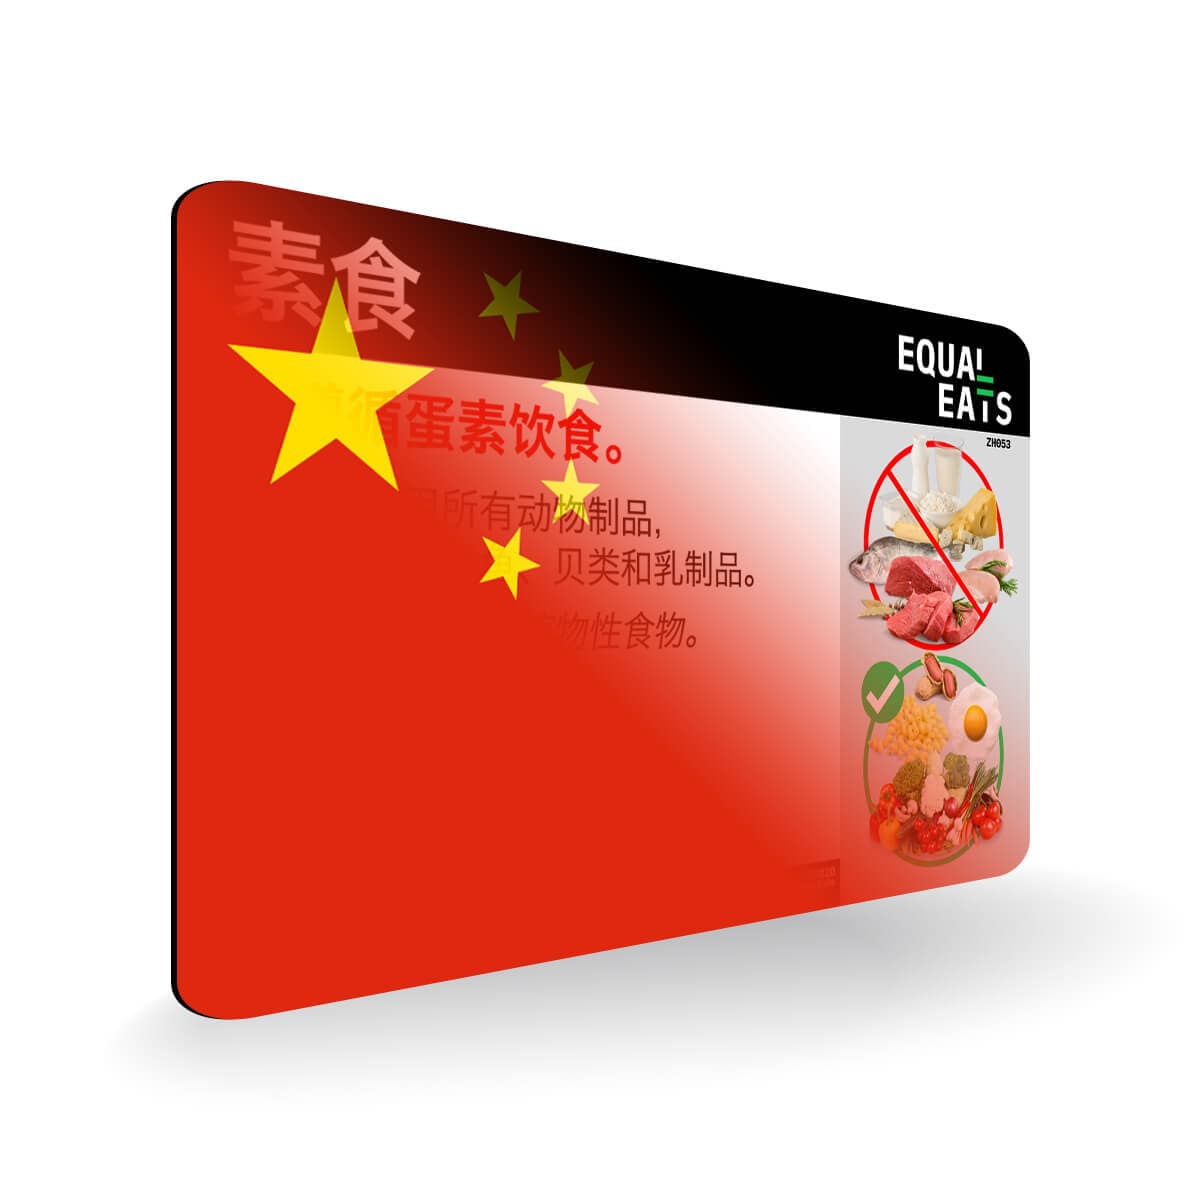 Ovo Vegetarian in Simplified Chinese. Card for Vegetarian in China